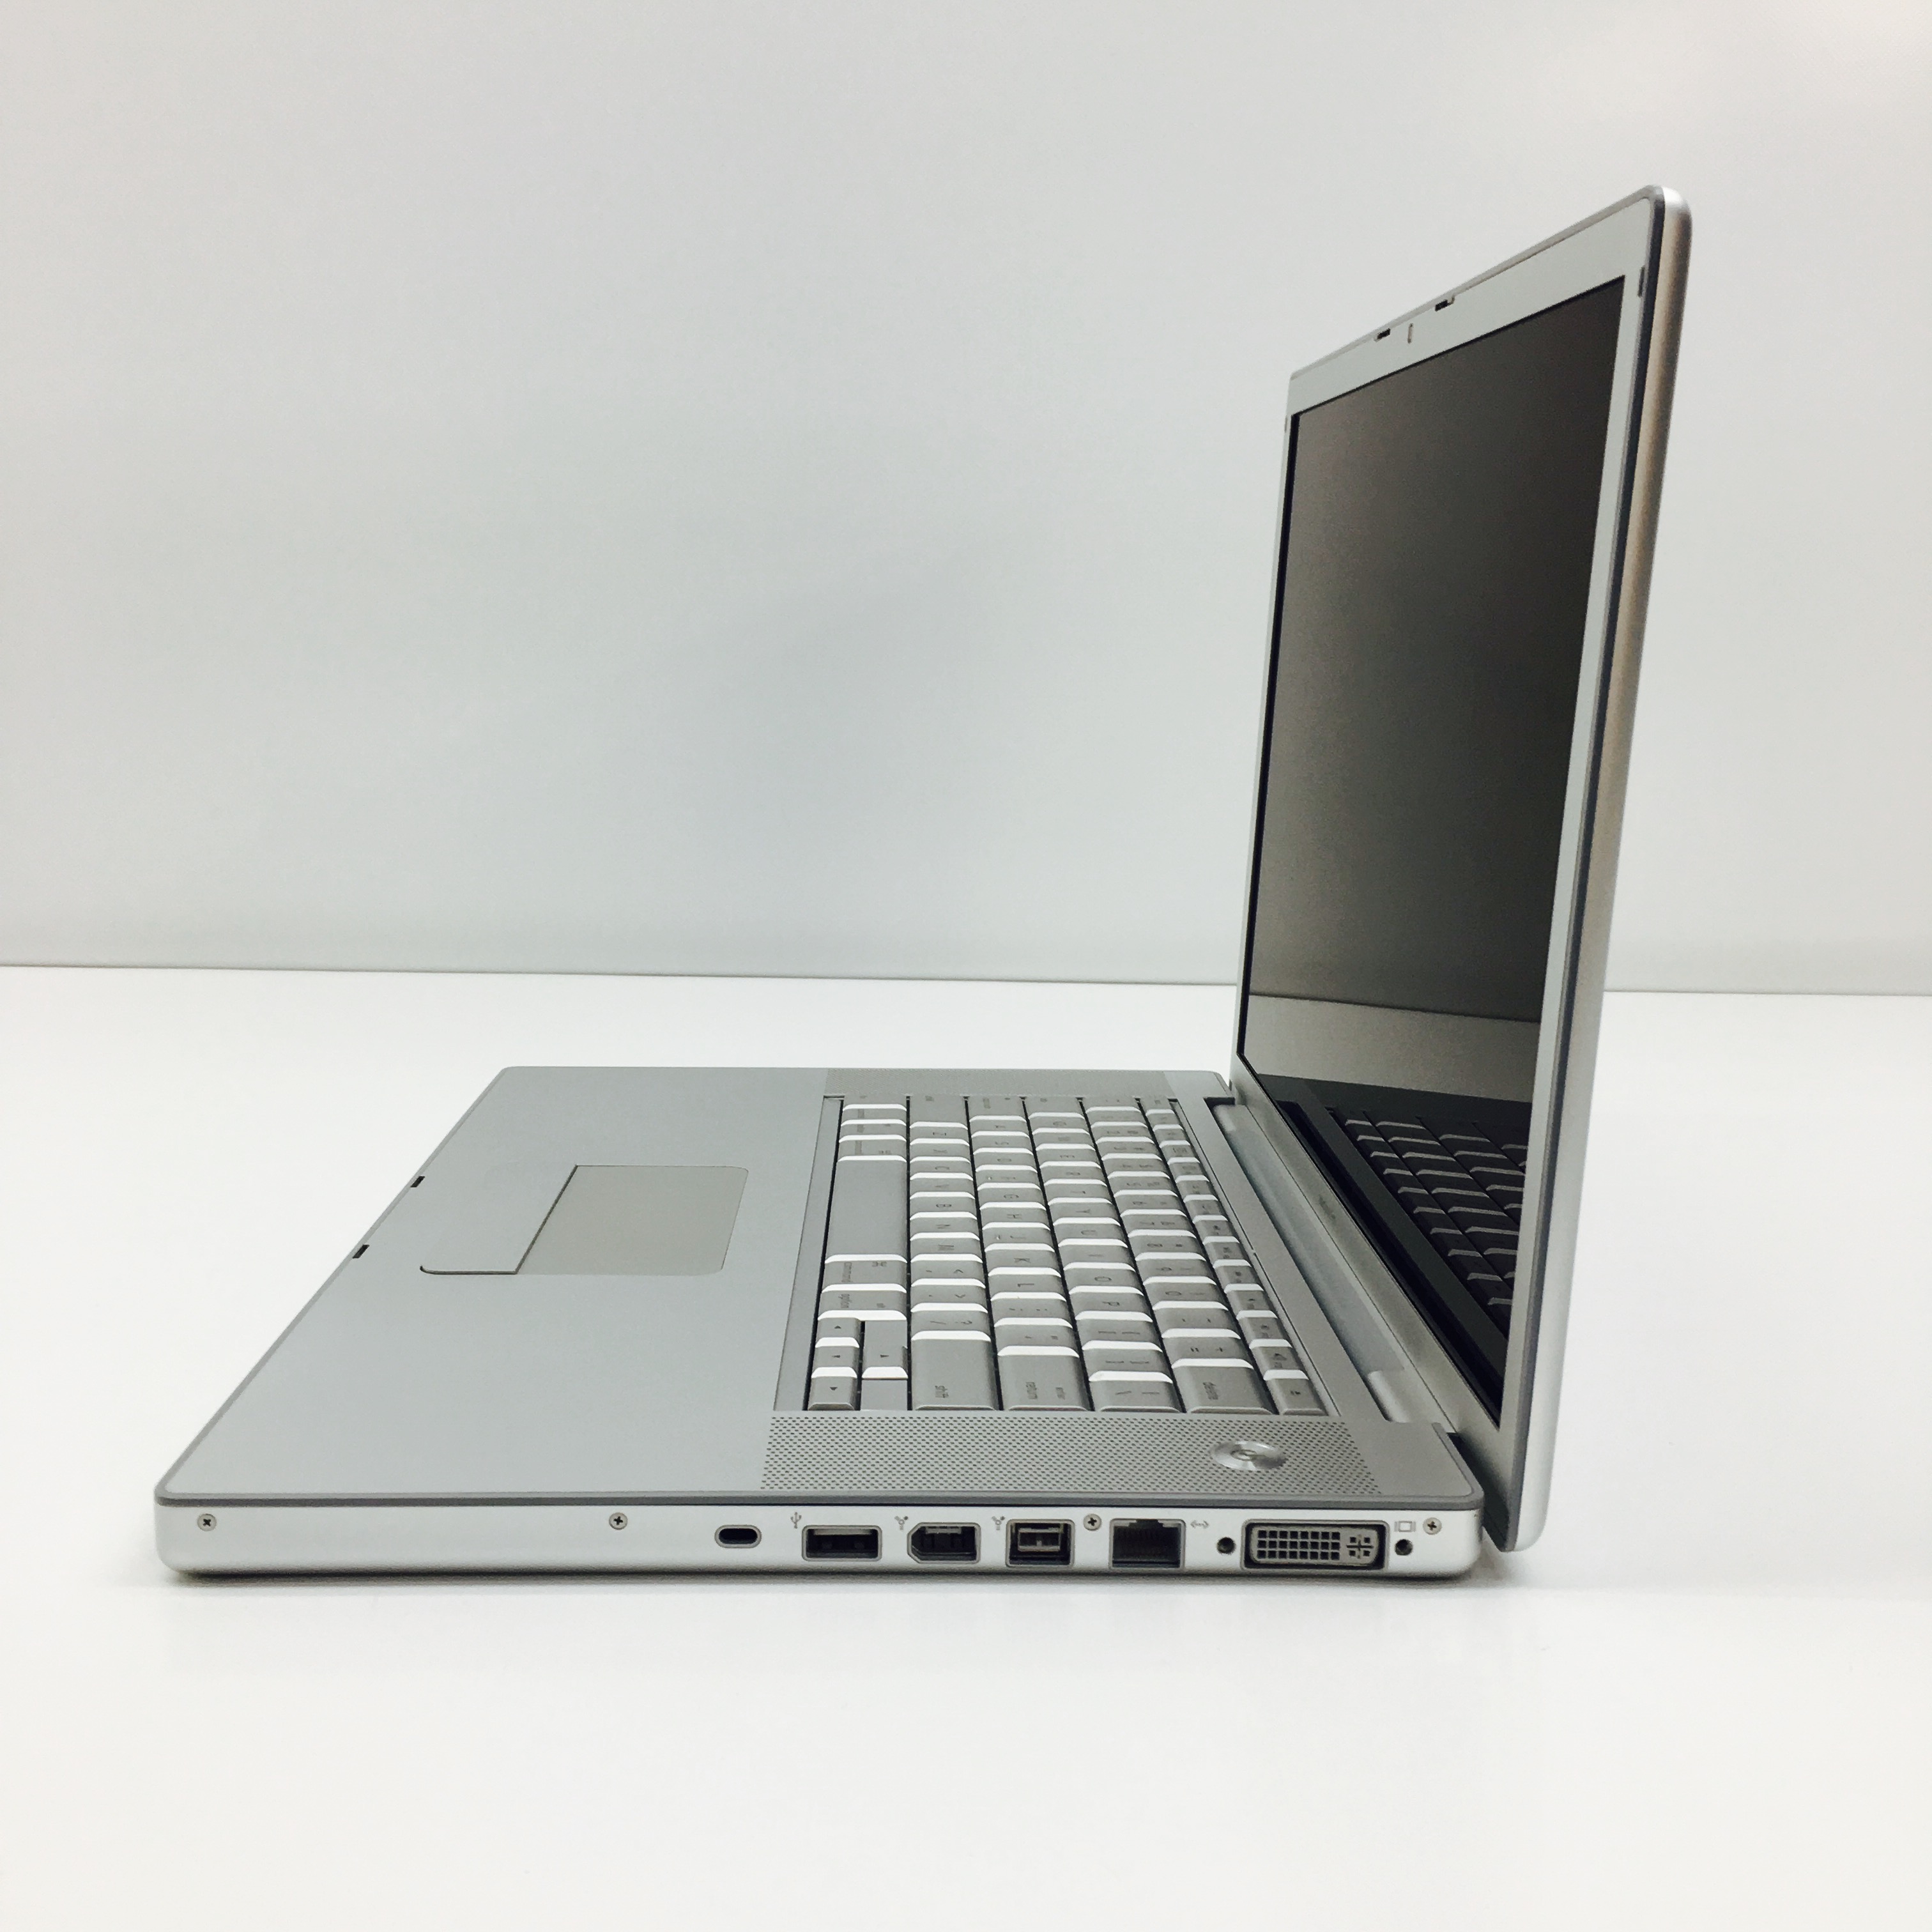 Fully Refurbished MacBook Pro 15" Mid 2008 INTEL CORE 2 DUO 2.4GHZ